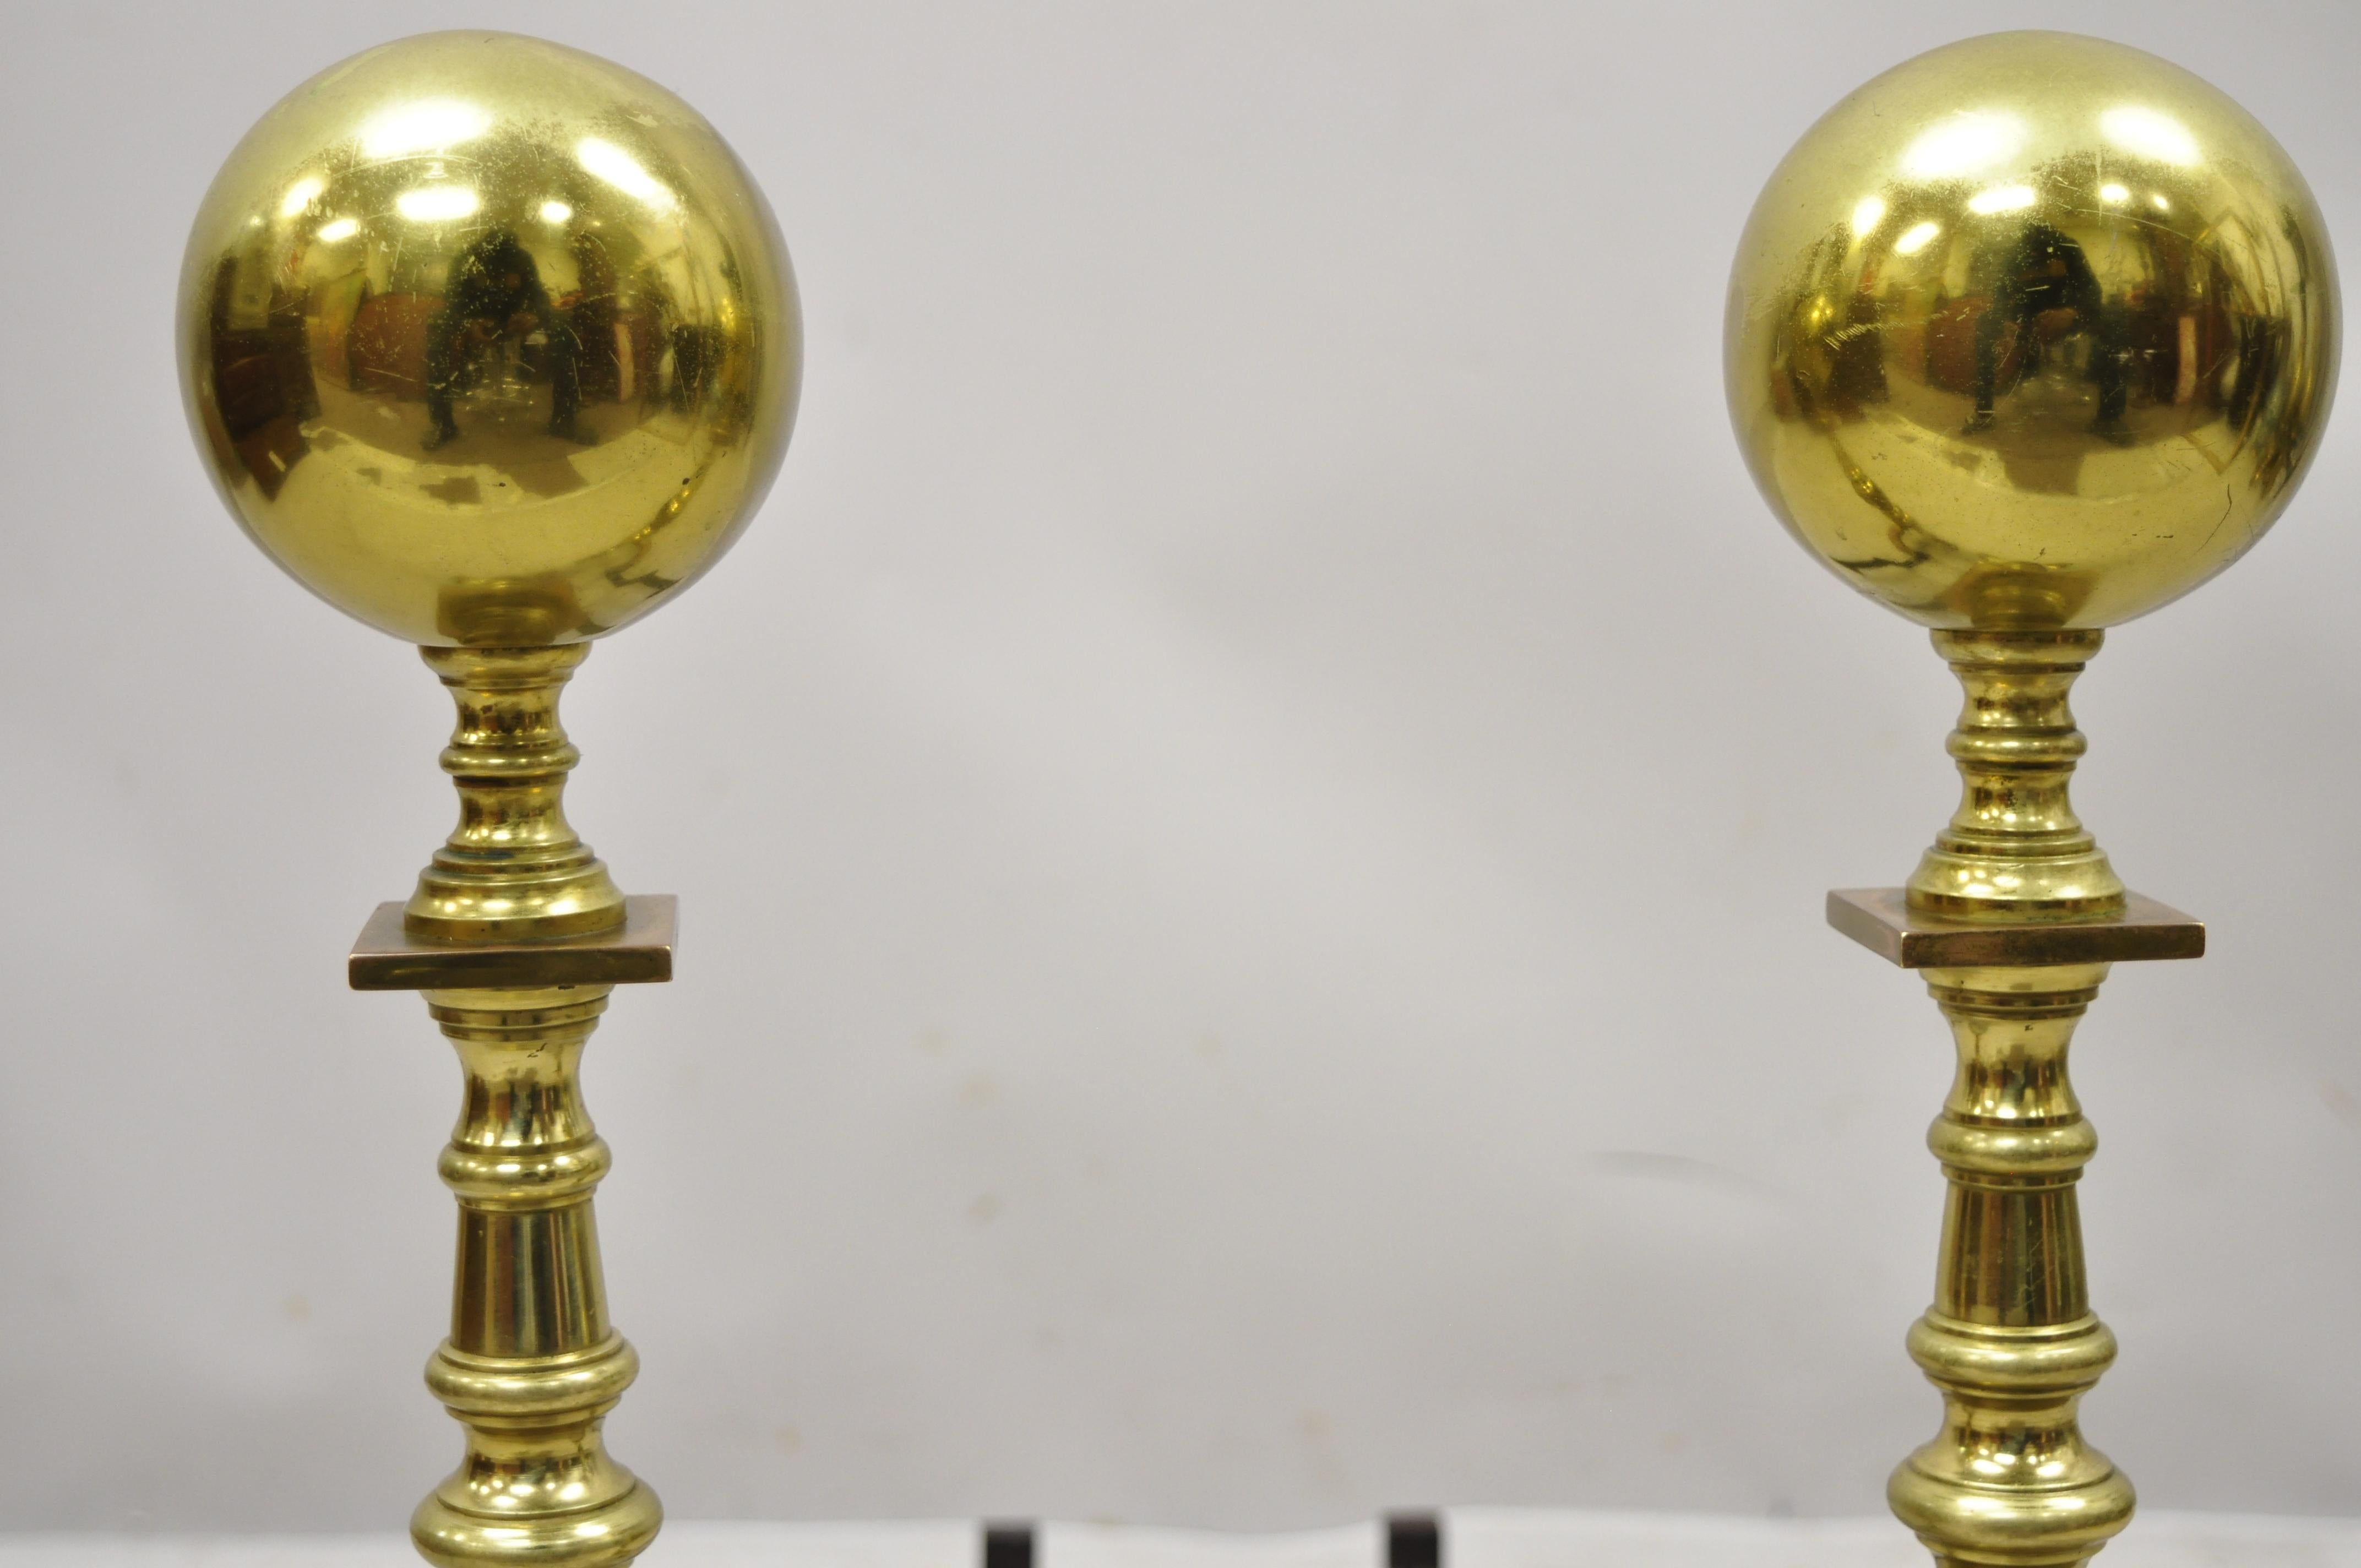 Antique brass cannonball spiral turned shaft cast iron andirons fireplace tools - a pair. Item features spiral turned shaft, large cannonball finials, branch Queen Anne style legs, very nice antique item, great style and form. Circa early to mid